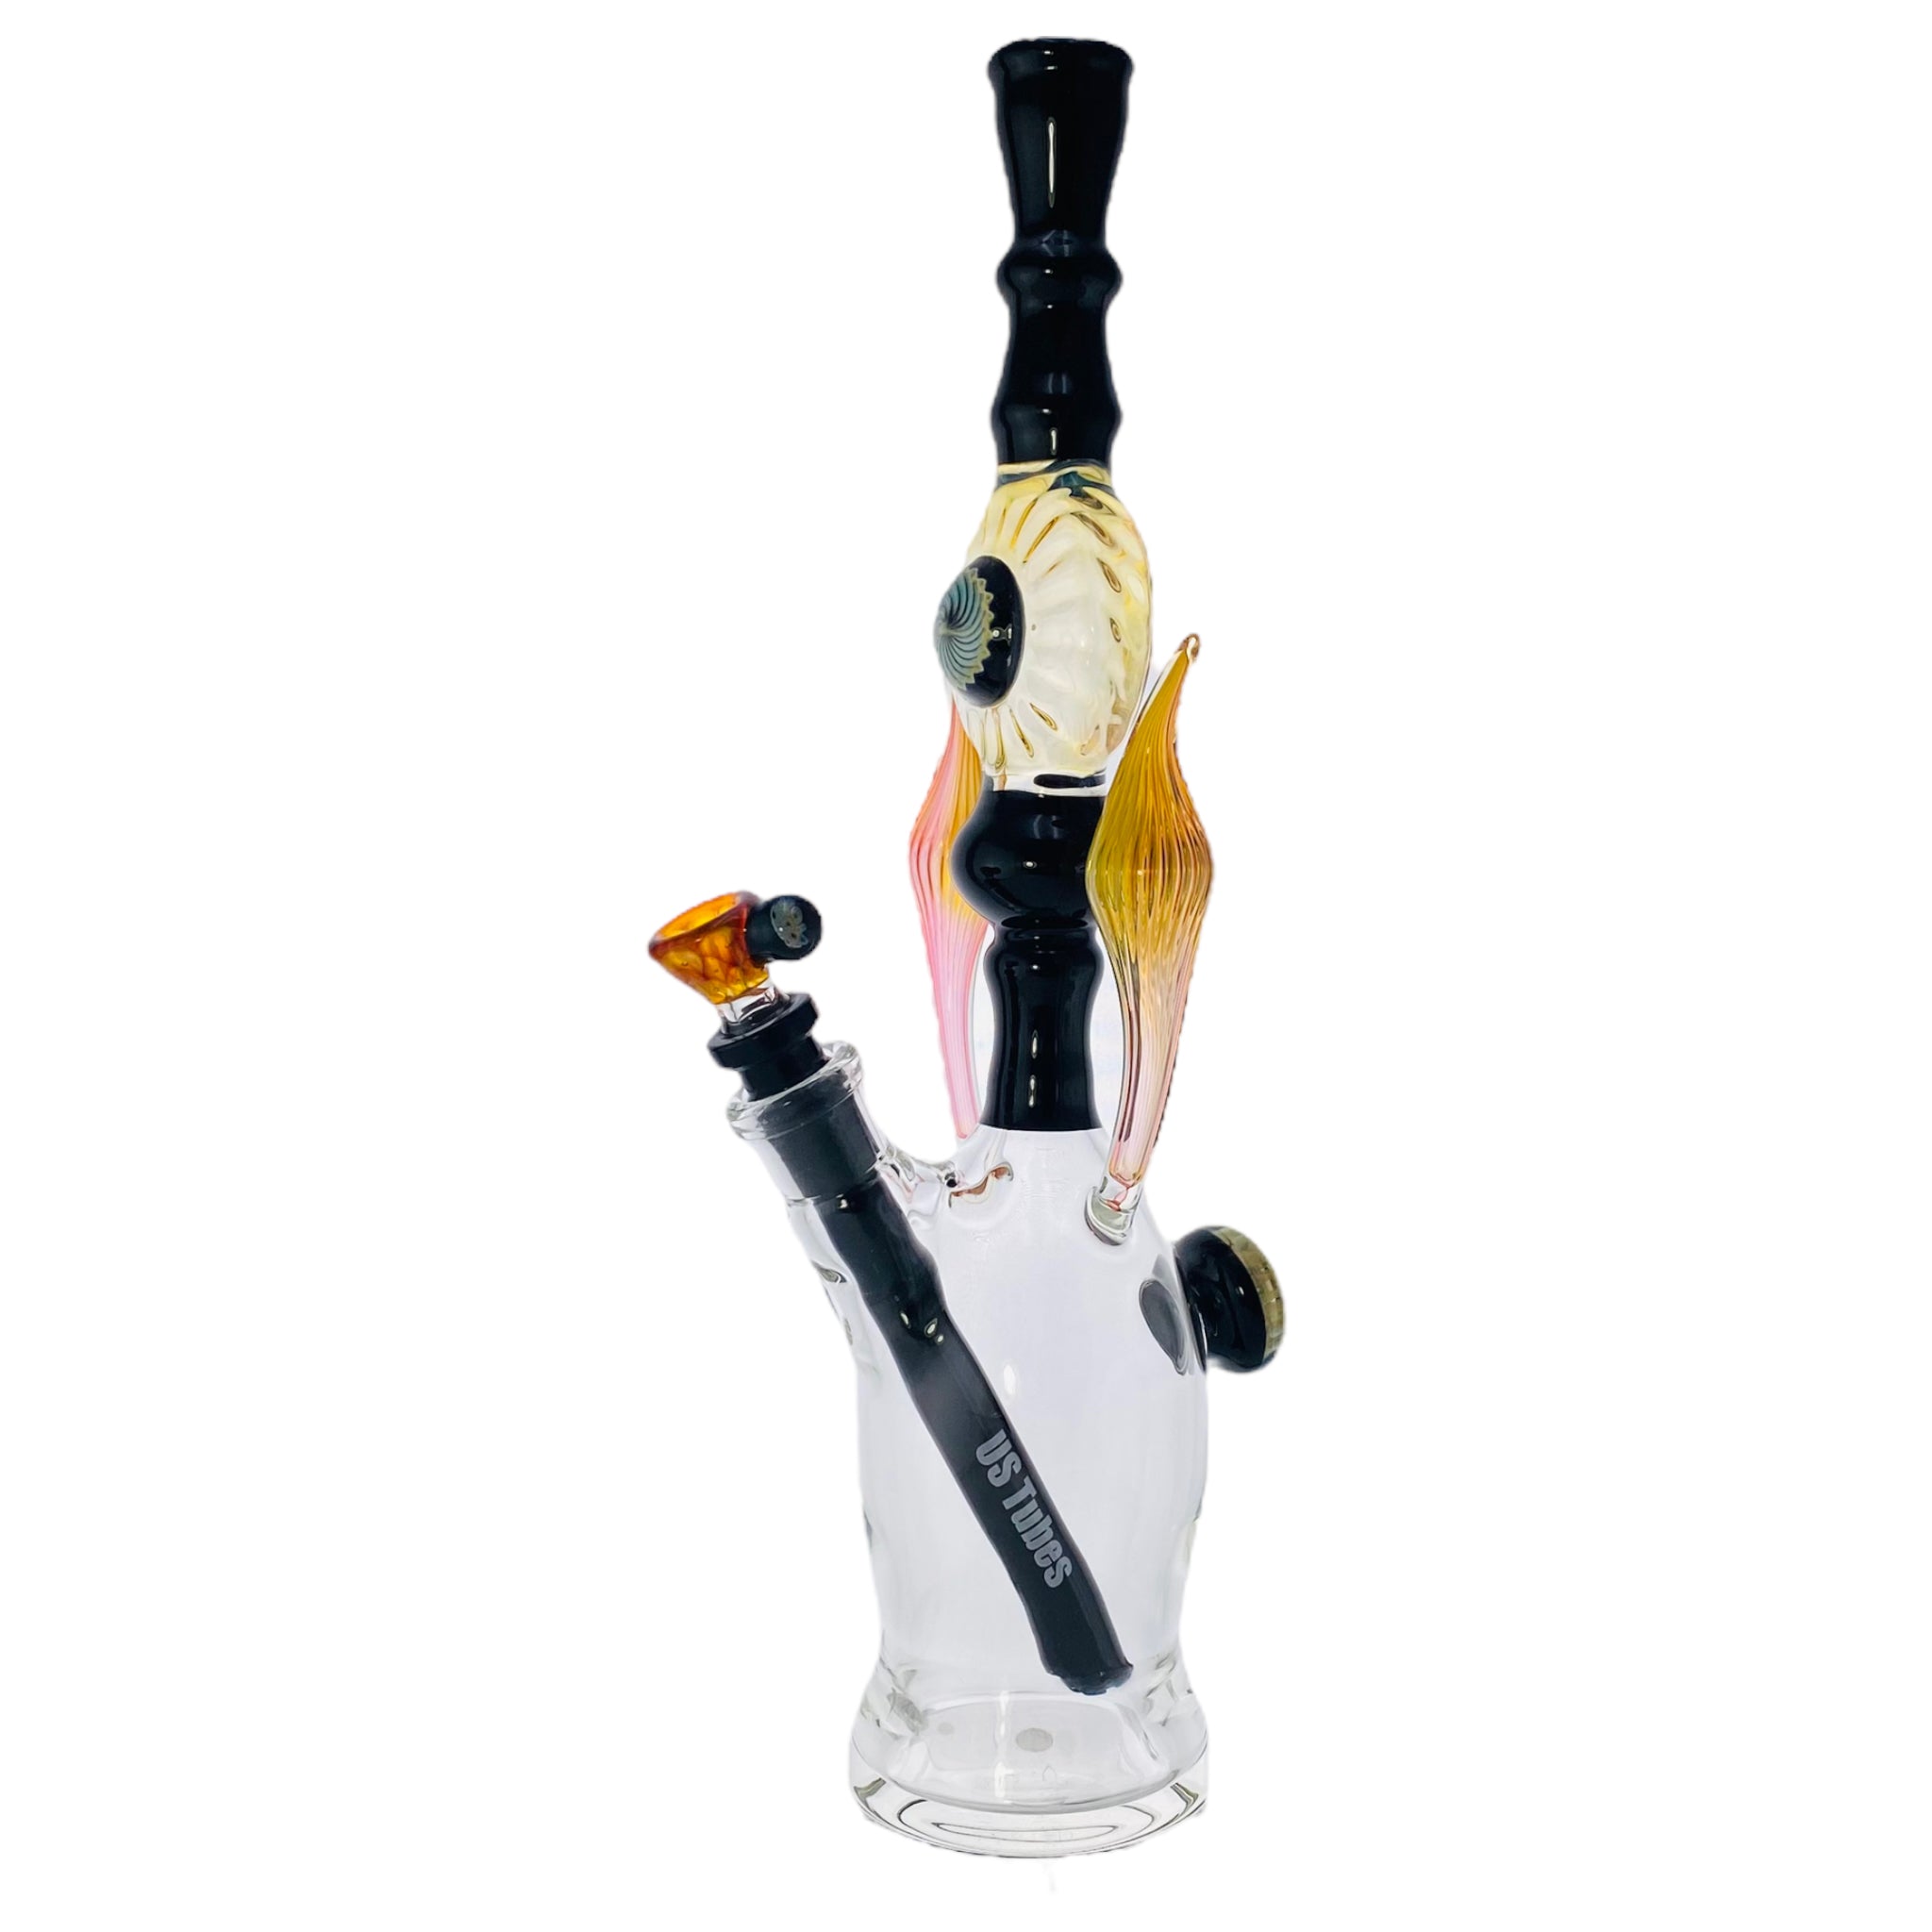 This 14-inch black and gold fume bong is a collaboration between Seth B Glass and US Tubes, combining superior craftsmanship with a stunning aesthetic. Fumed with real gold and featuring black US Tubes downstem